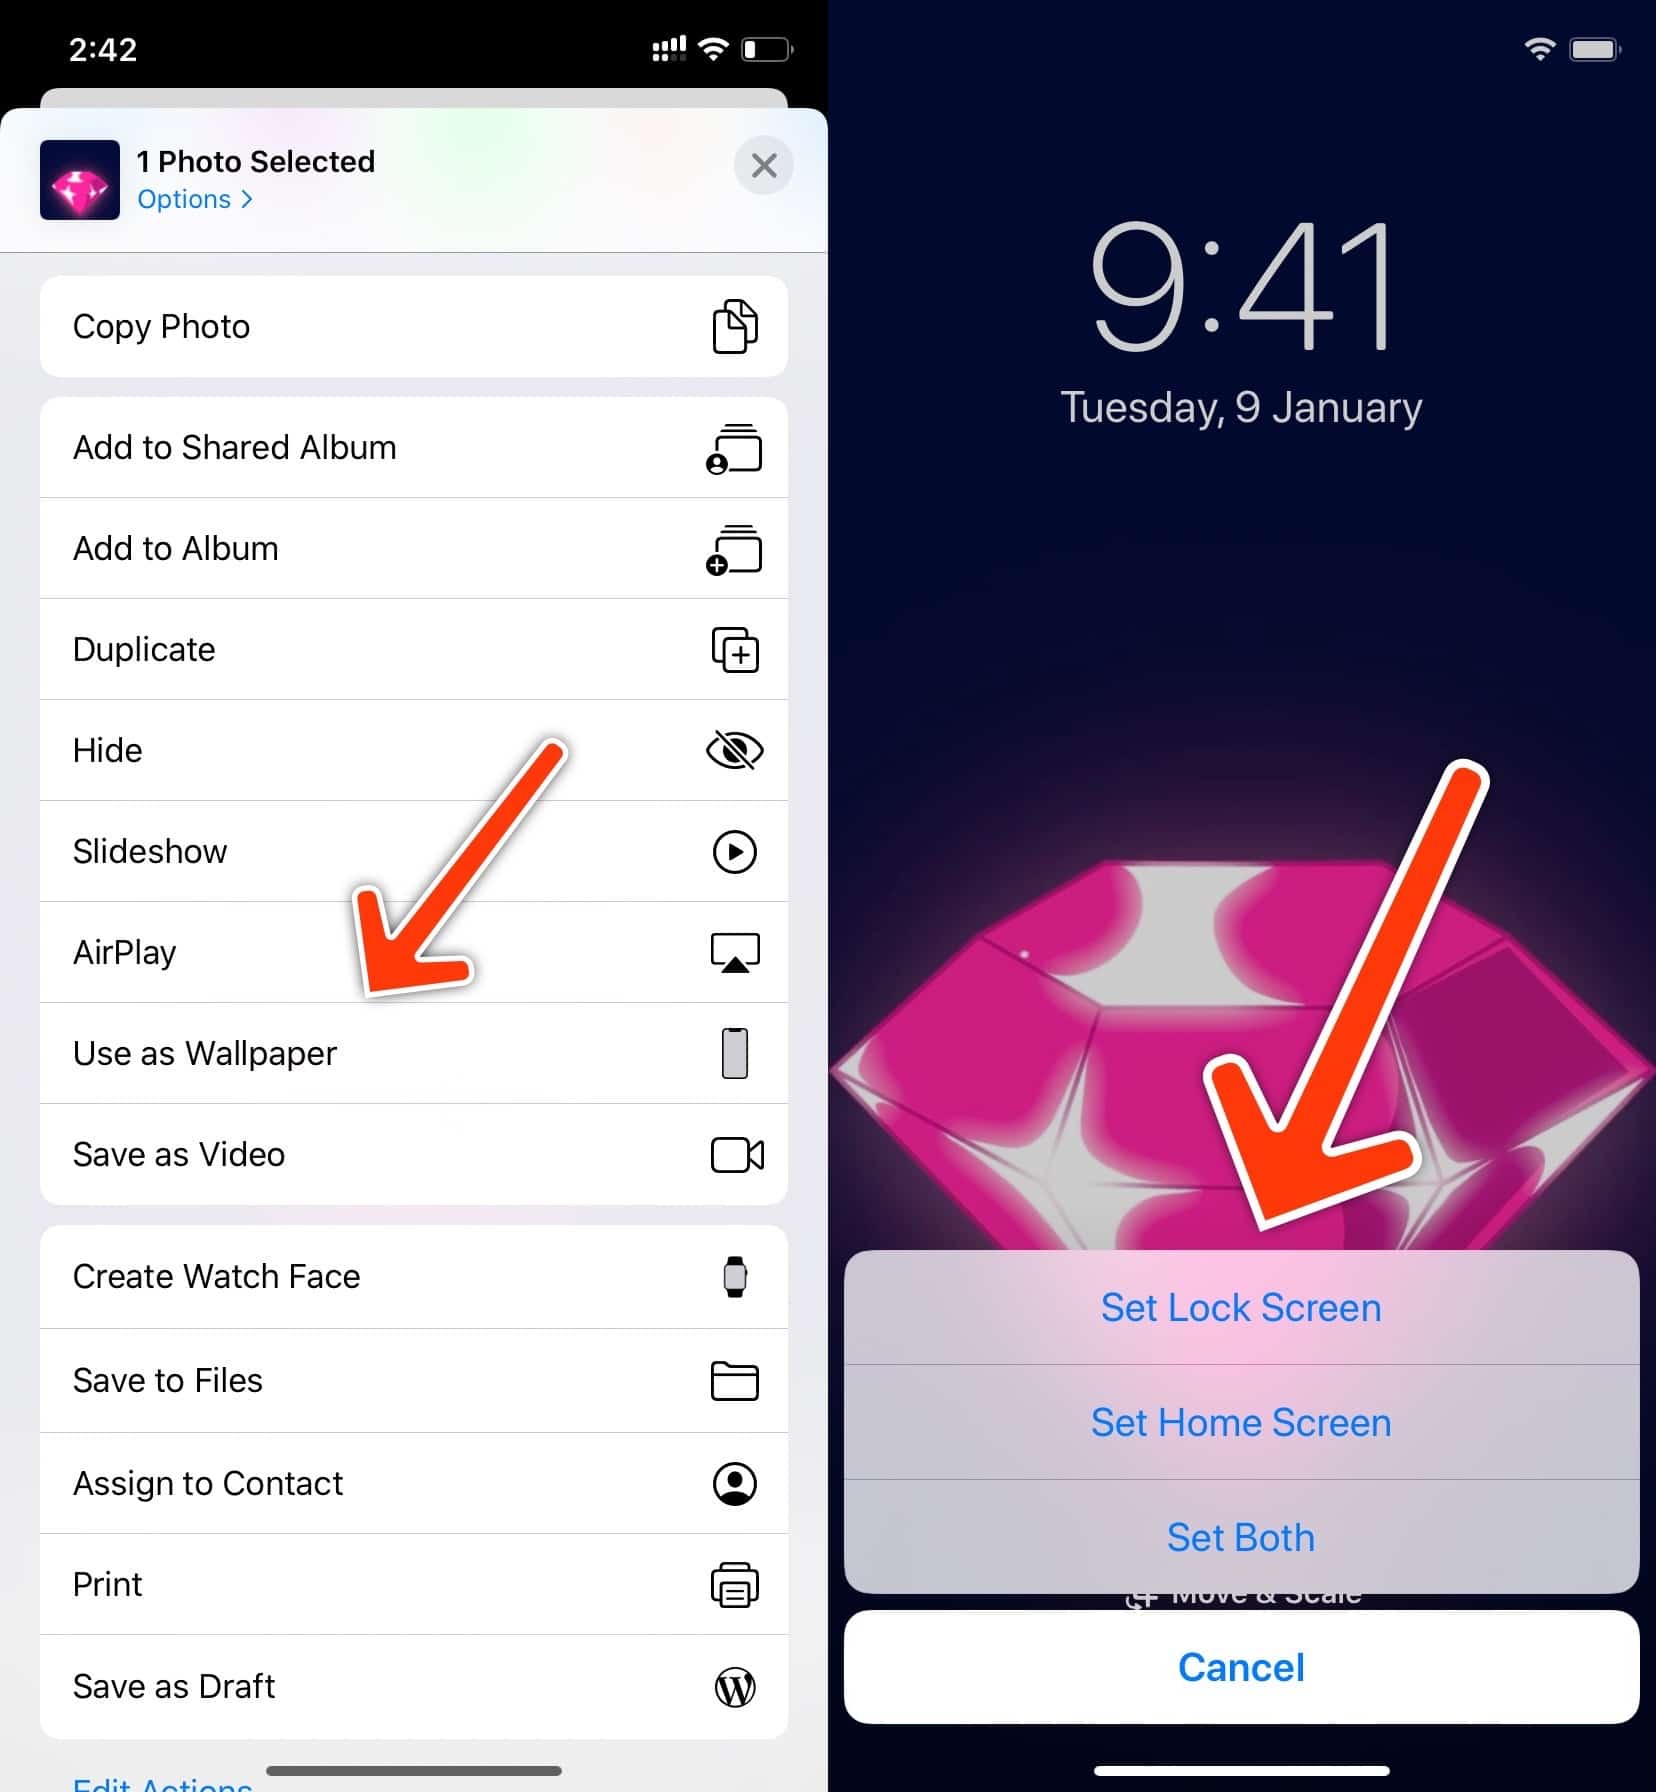 How to Create and Use Live Wallpapers on iPhone With This Cool Trick